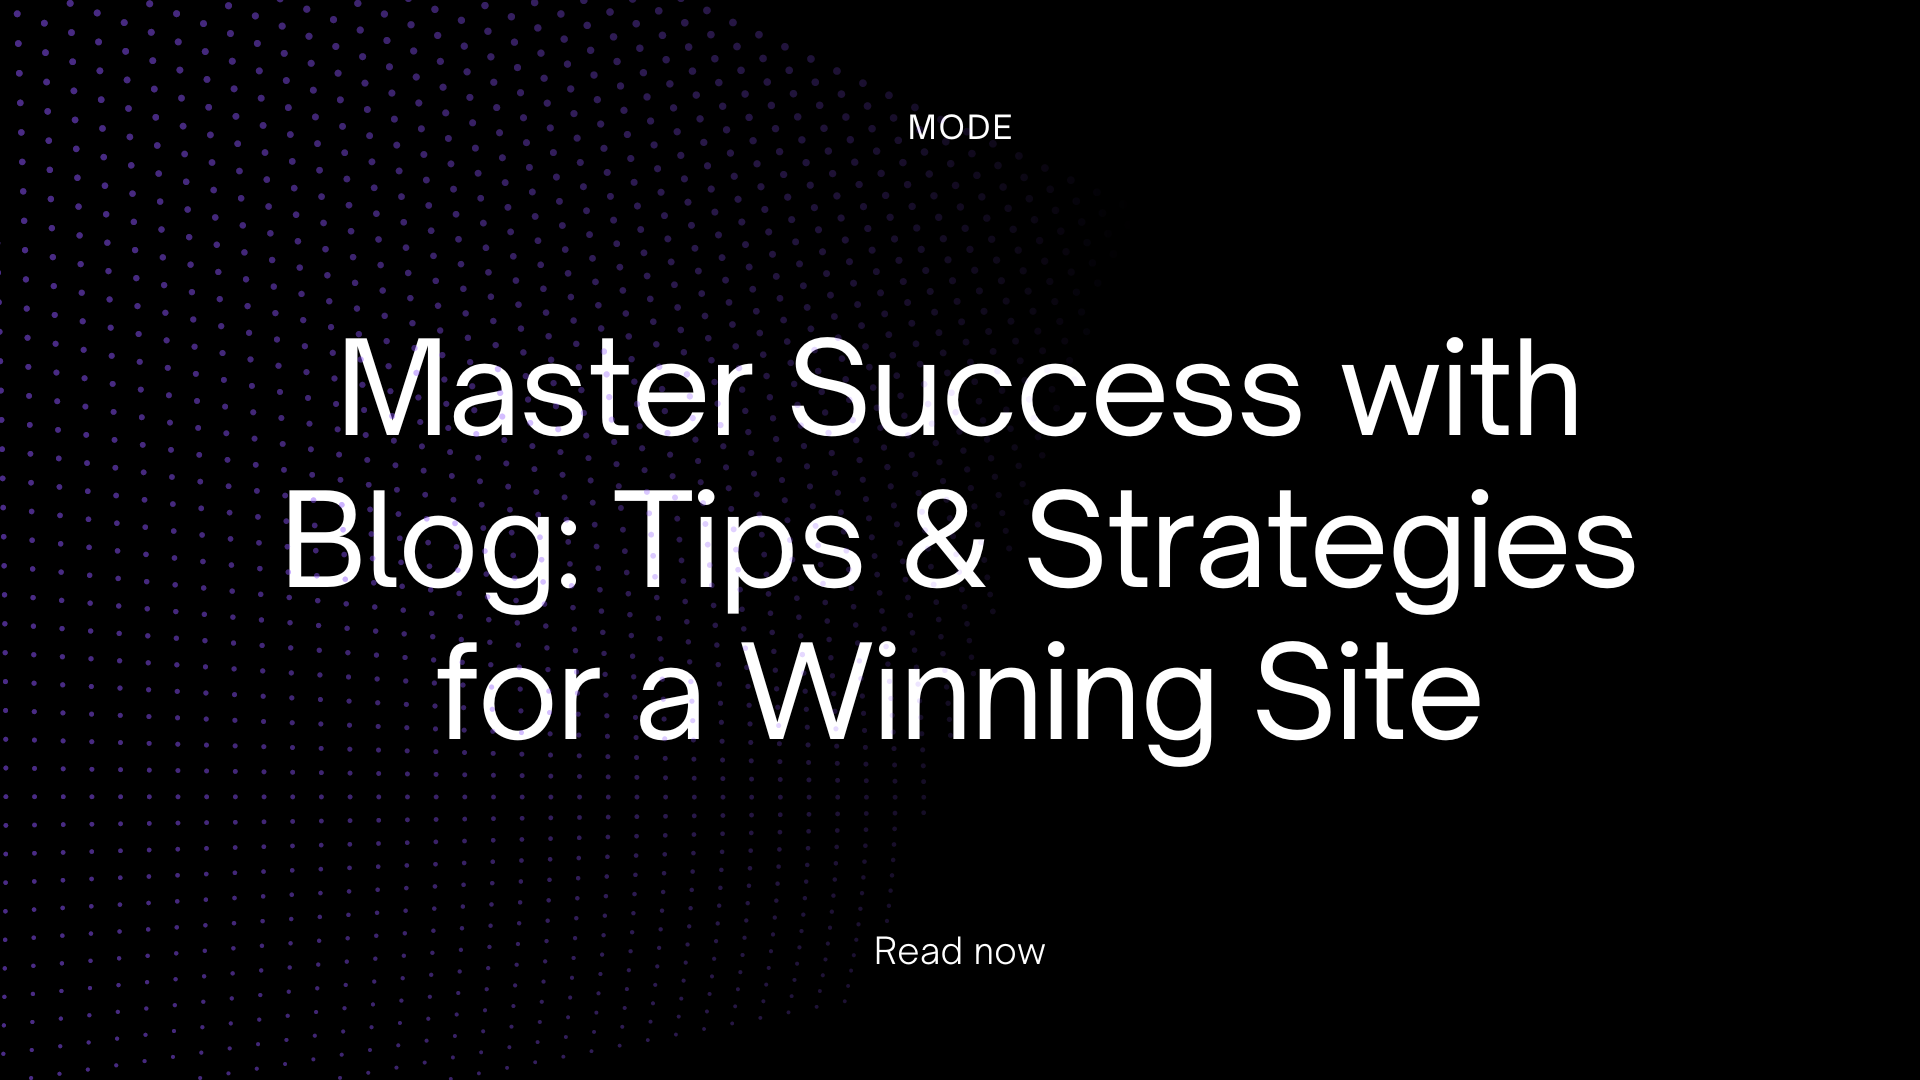 Master Success with Blog: Tips & Strategies for a Winning Site